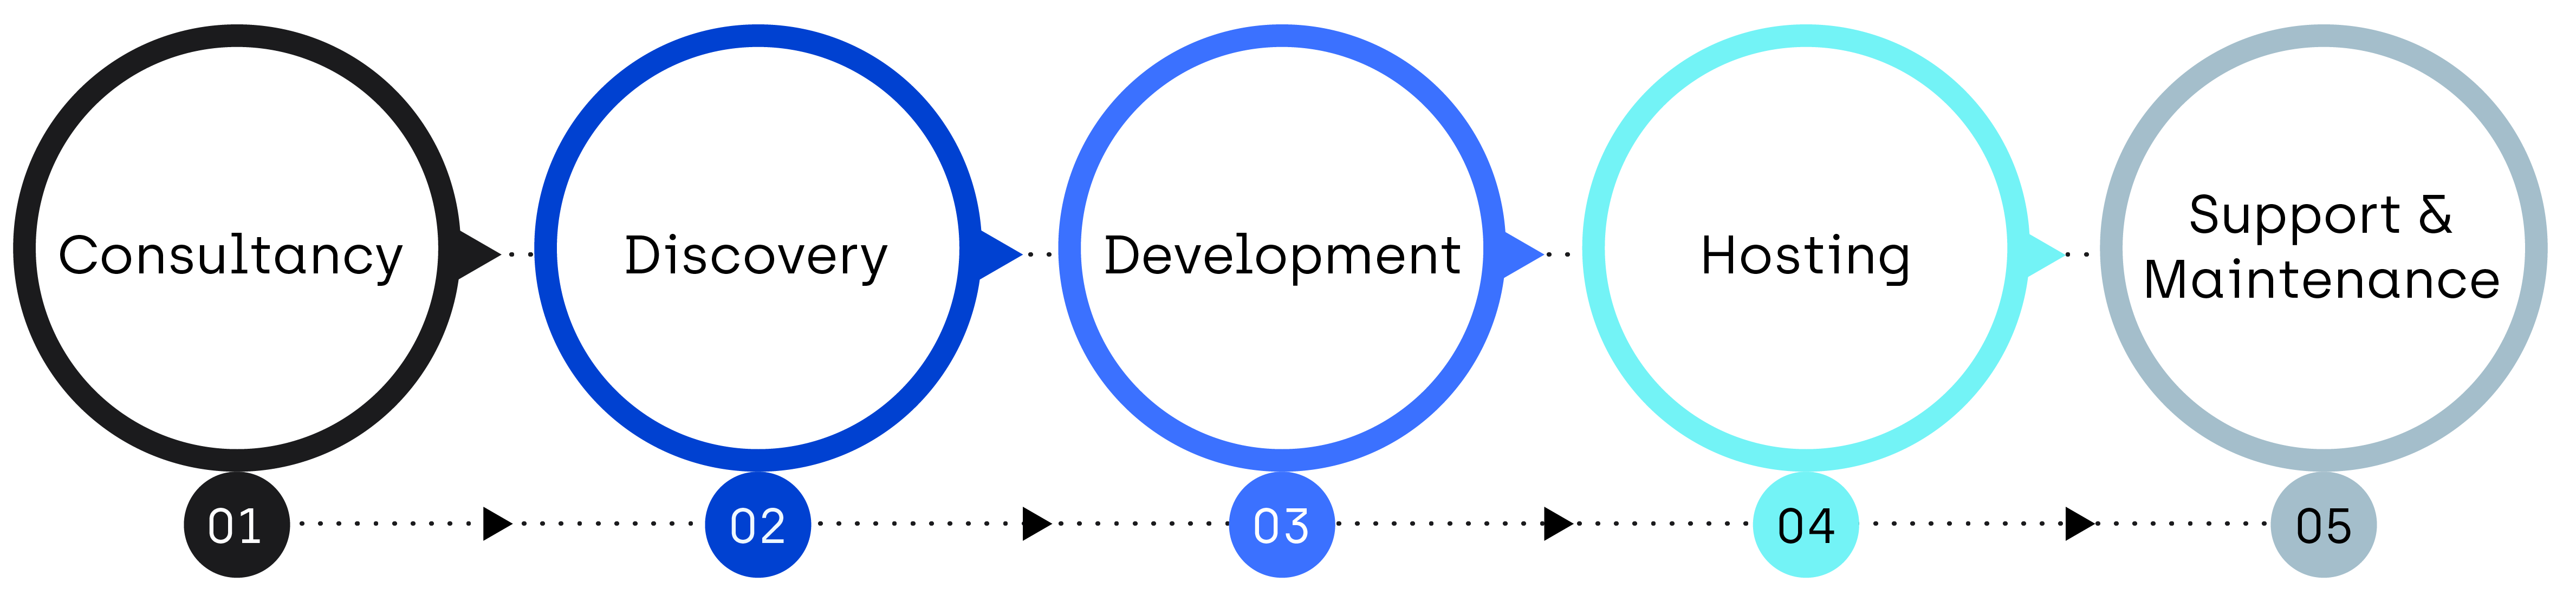 The end-to-end software development lifecycle